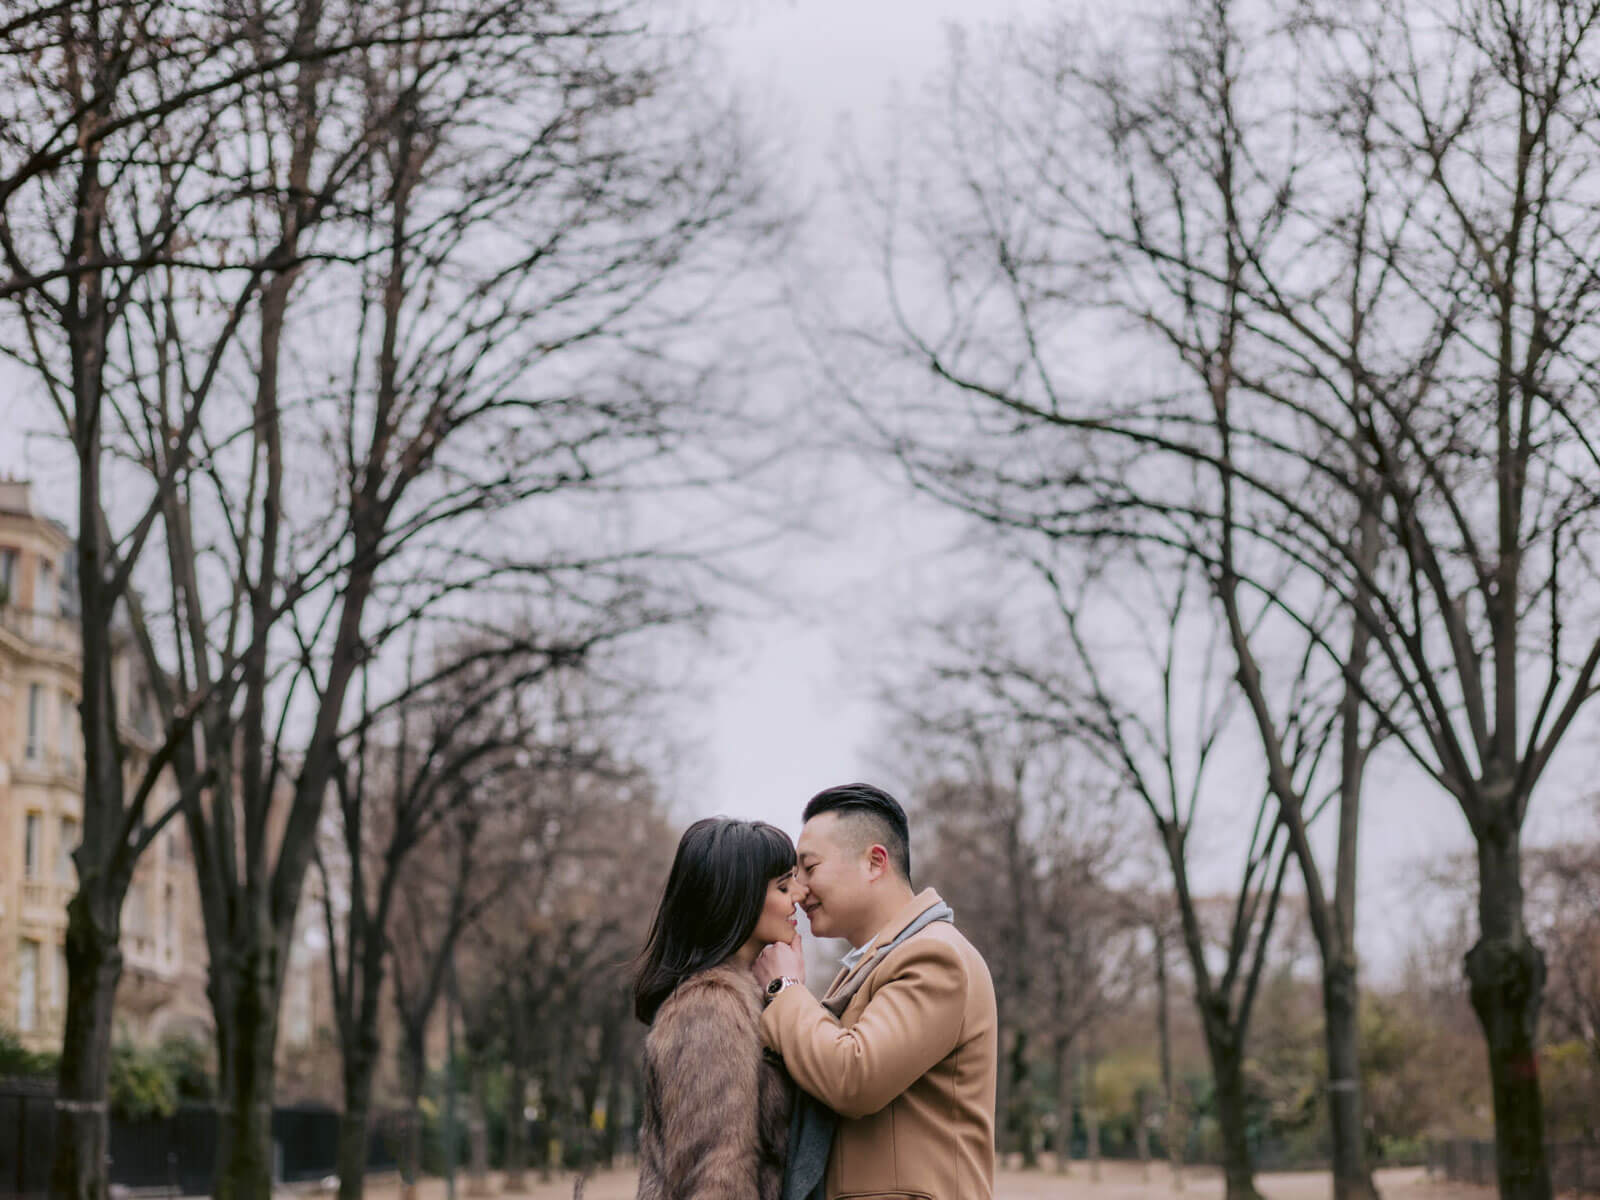 The bride and groom are about to kiss amidst dry trees in Paris, France for their New Year's destination wedding. Image by Jenny Fu Studio